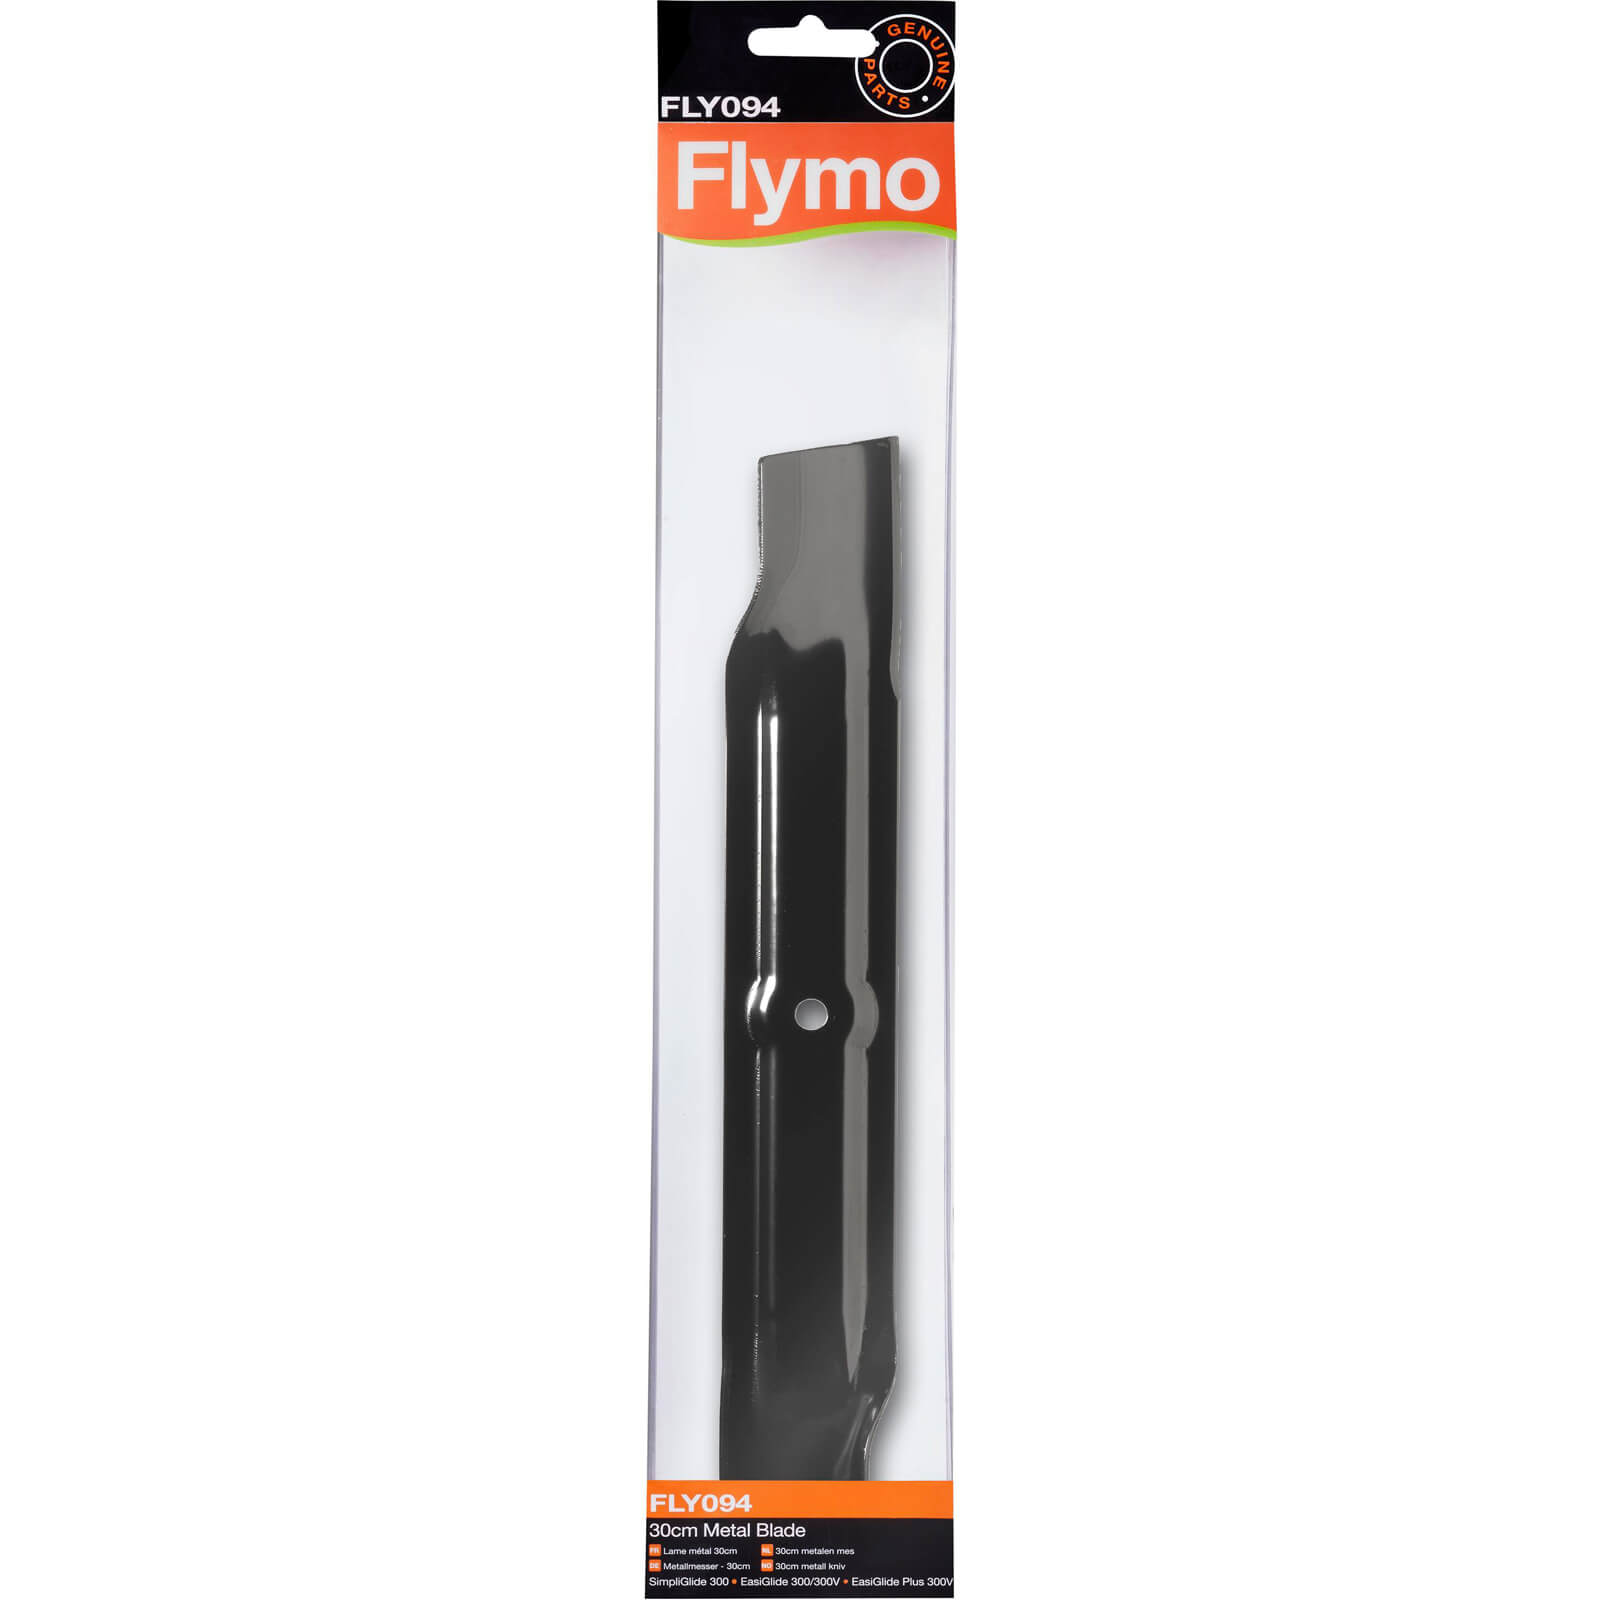 Flymo FLY094 Genuine Blade for EasiGlide 300, 300V and 300VC Lawnmowers 300mm Pack of 1